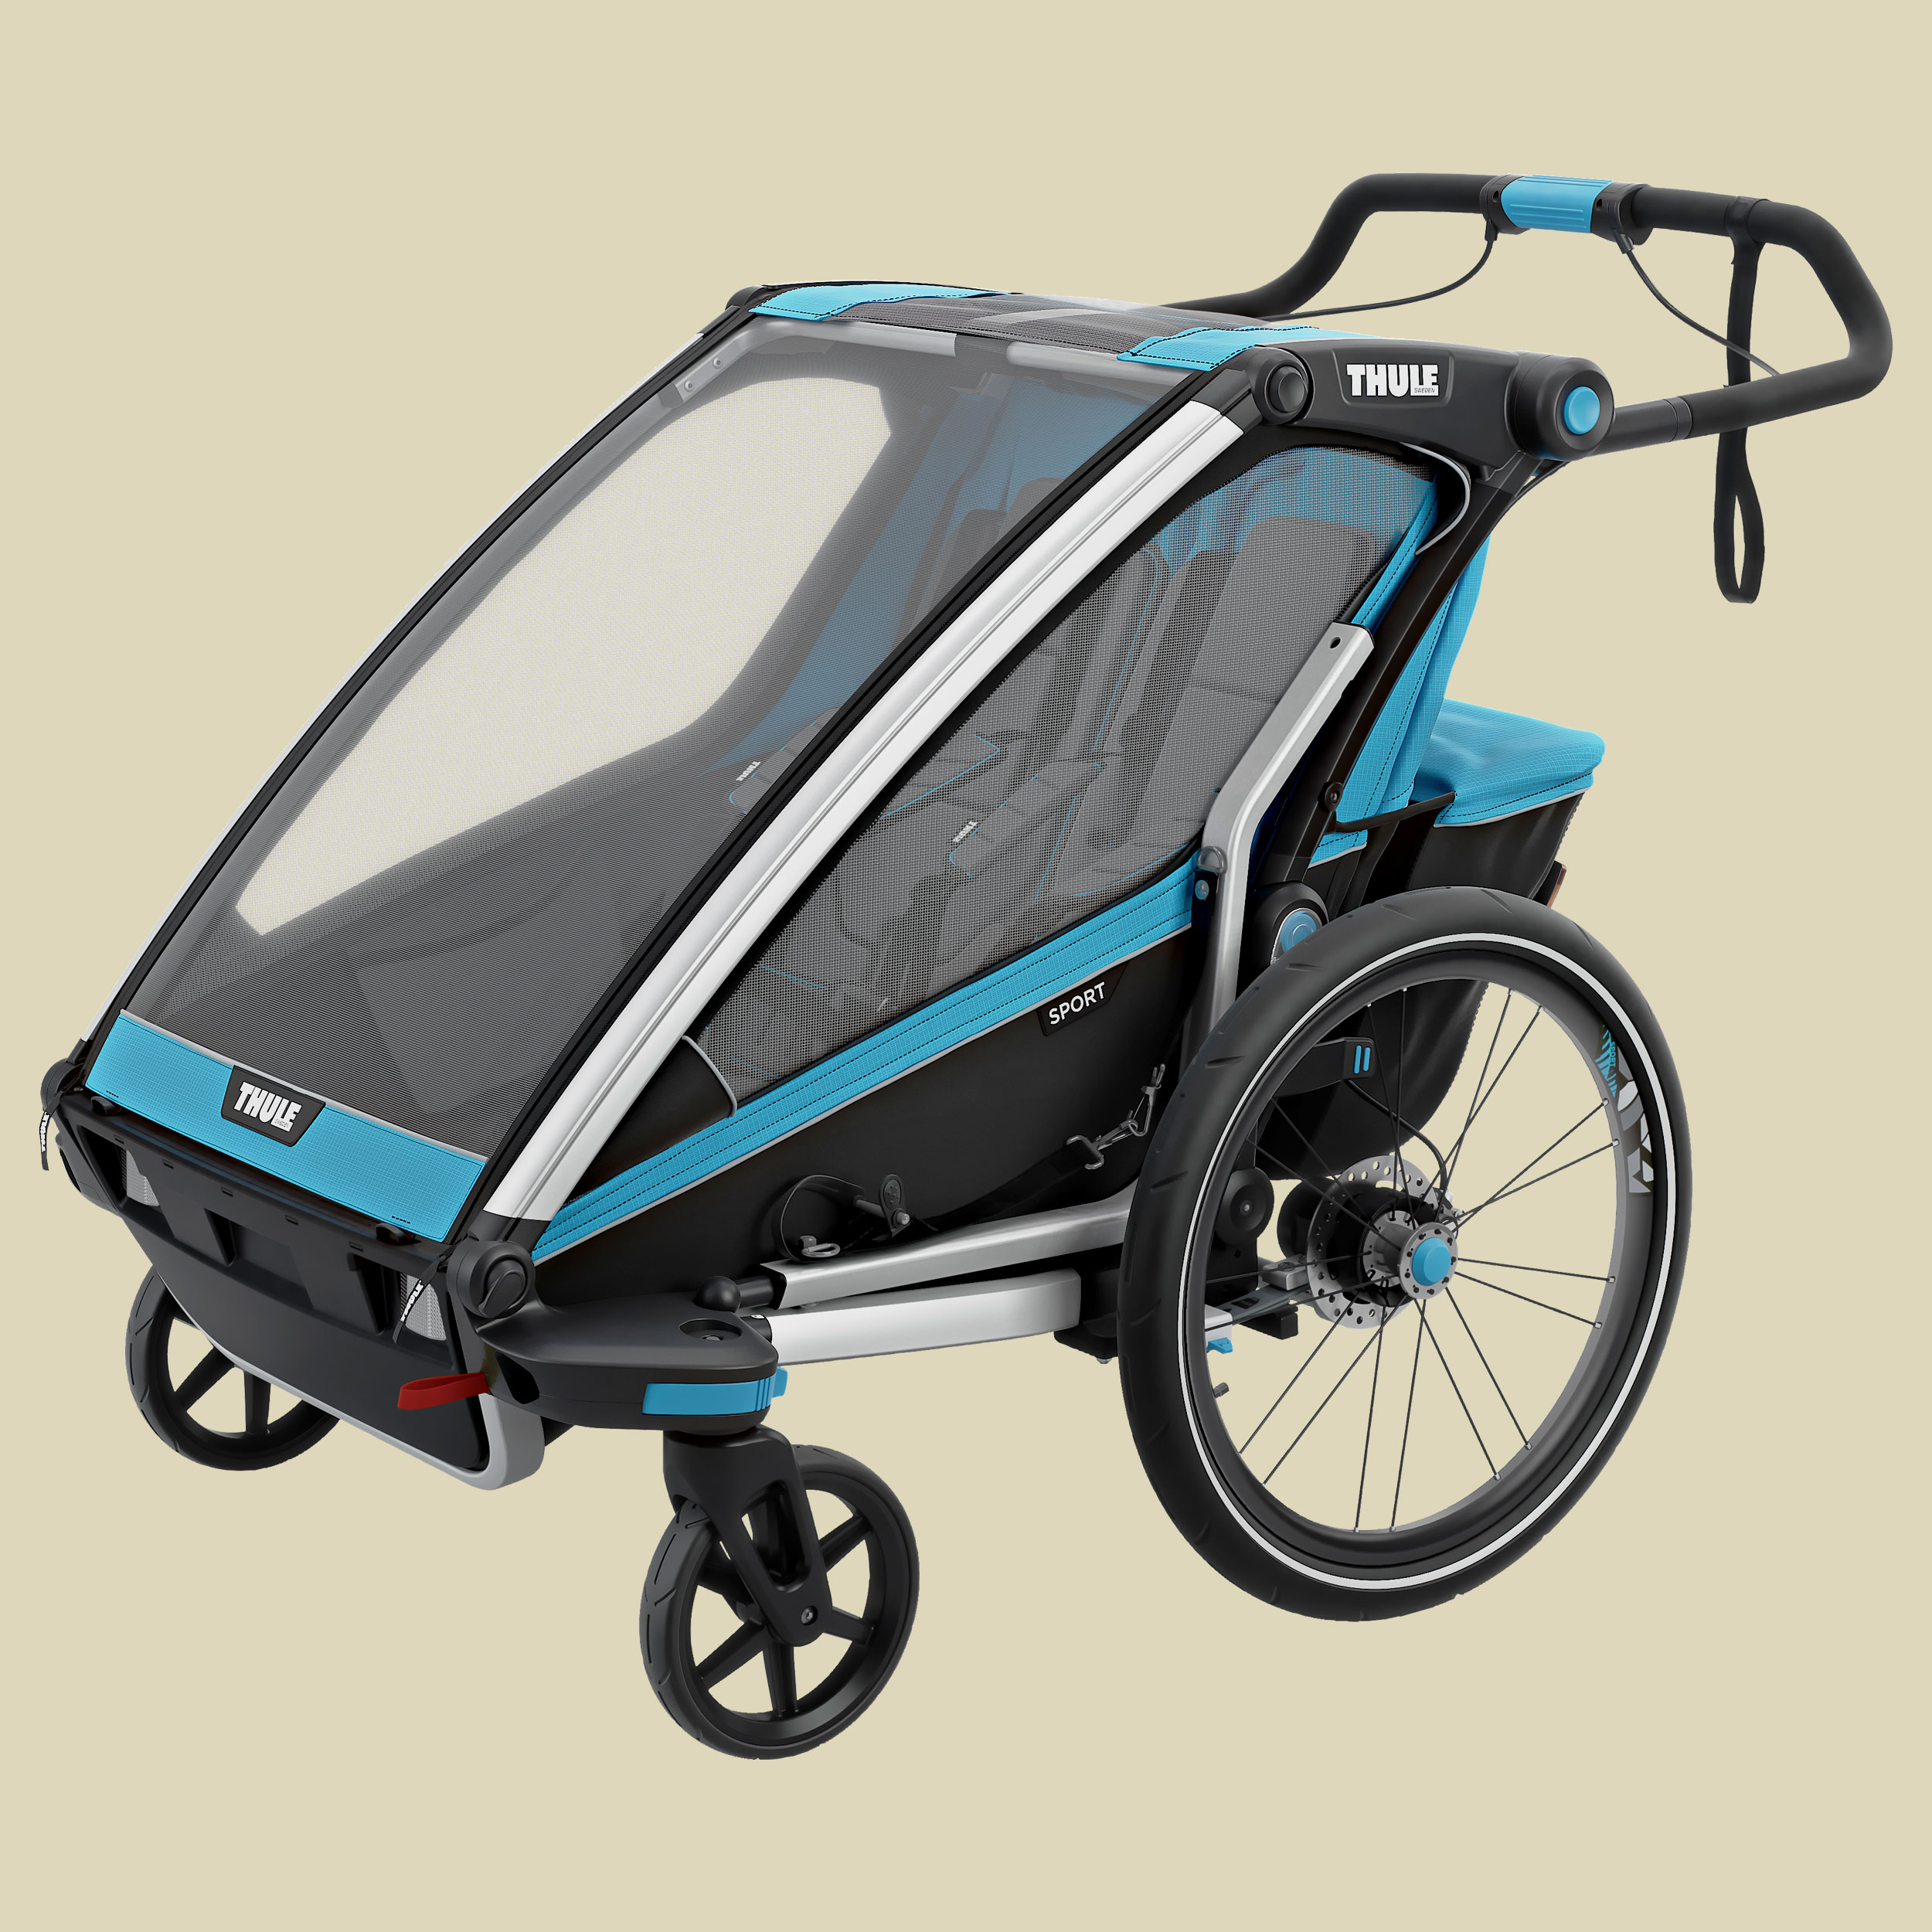 Chariot Sport 2 mit StVZO-Beleuchtung Farbe thule blue/black